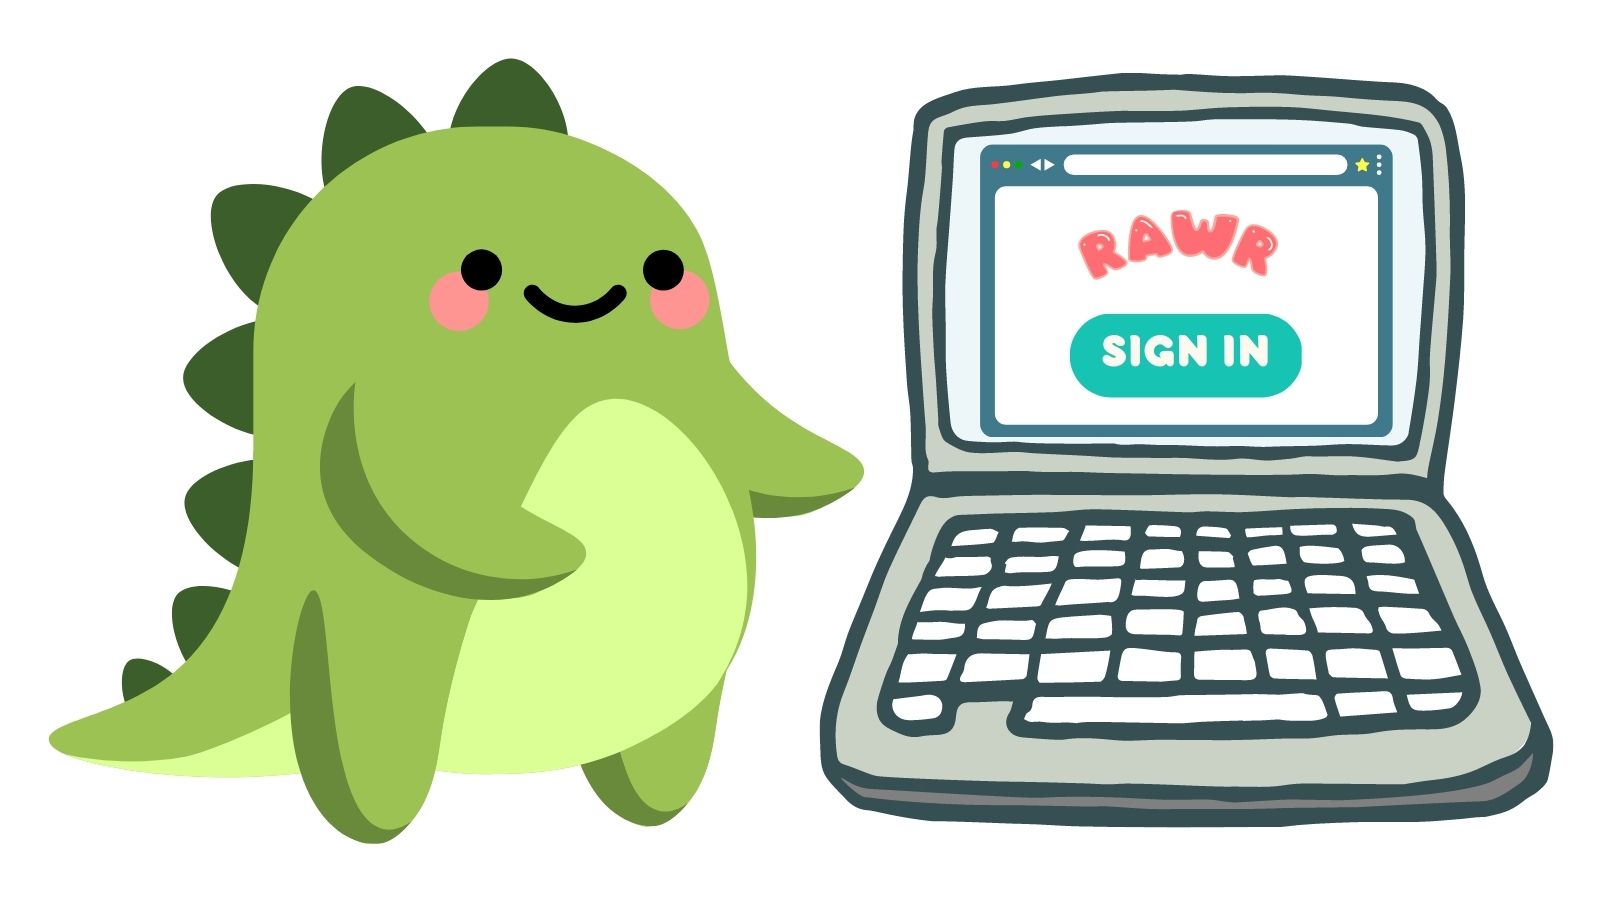 Sunny, a cute smiley dinosaur, is ready to sign in to the Rawr app